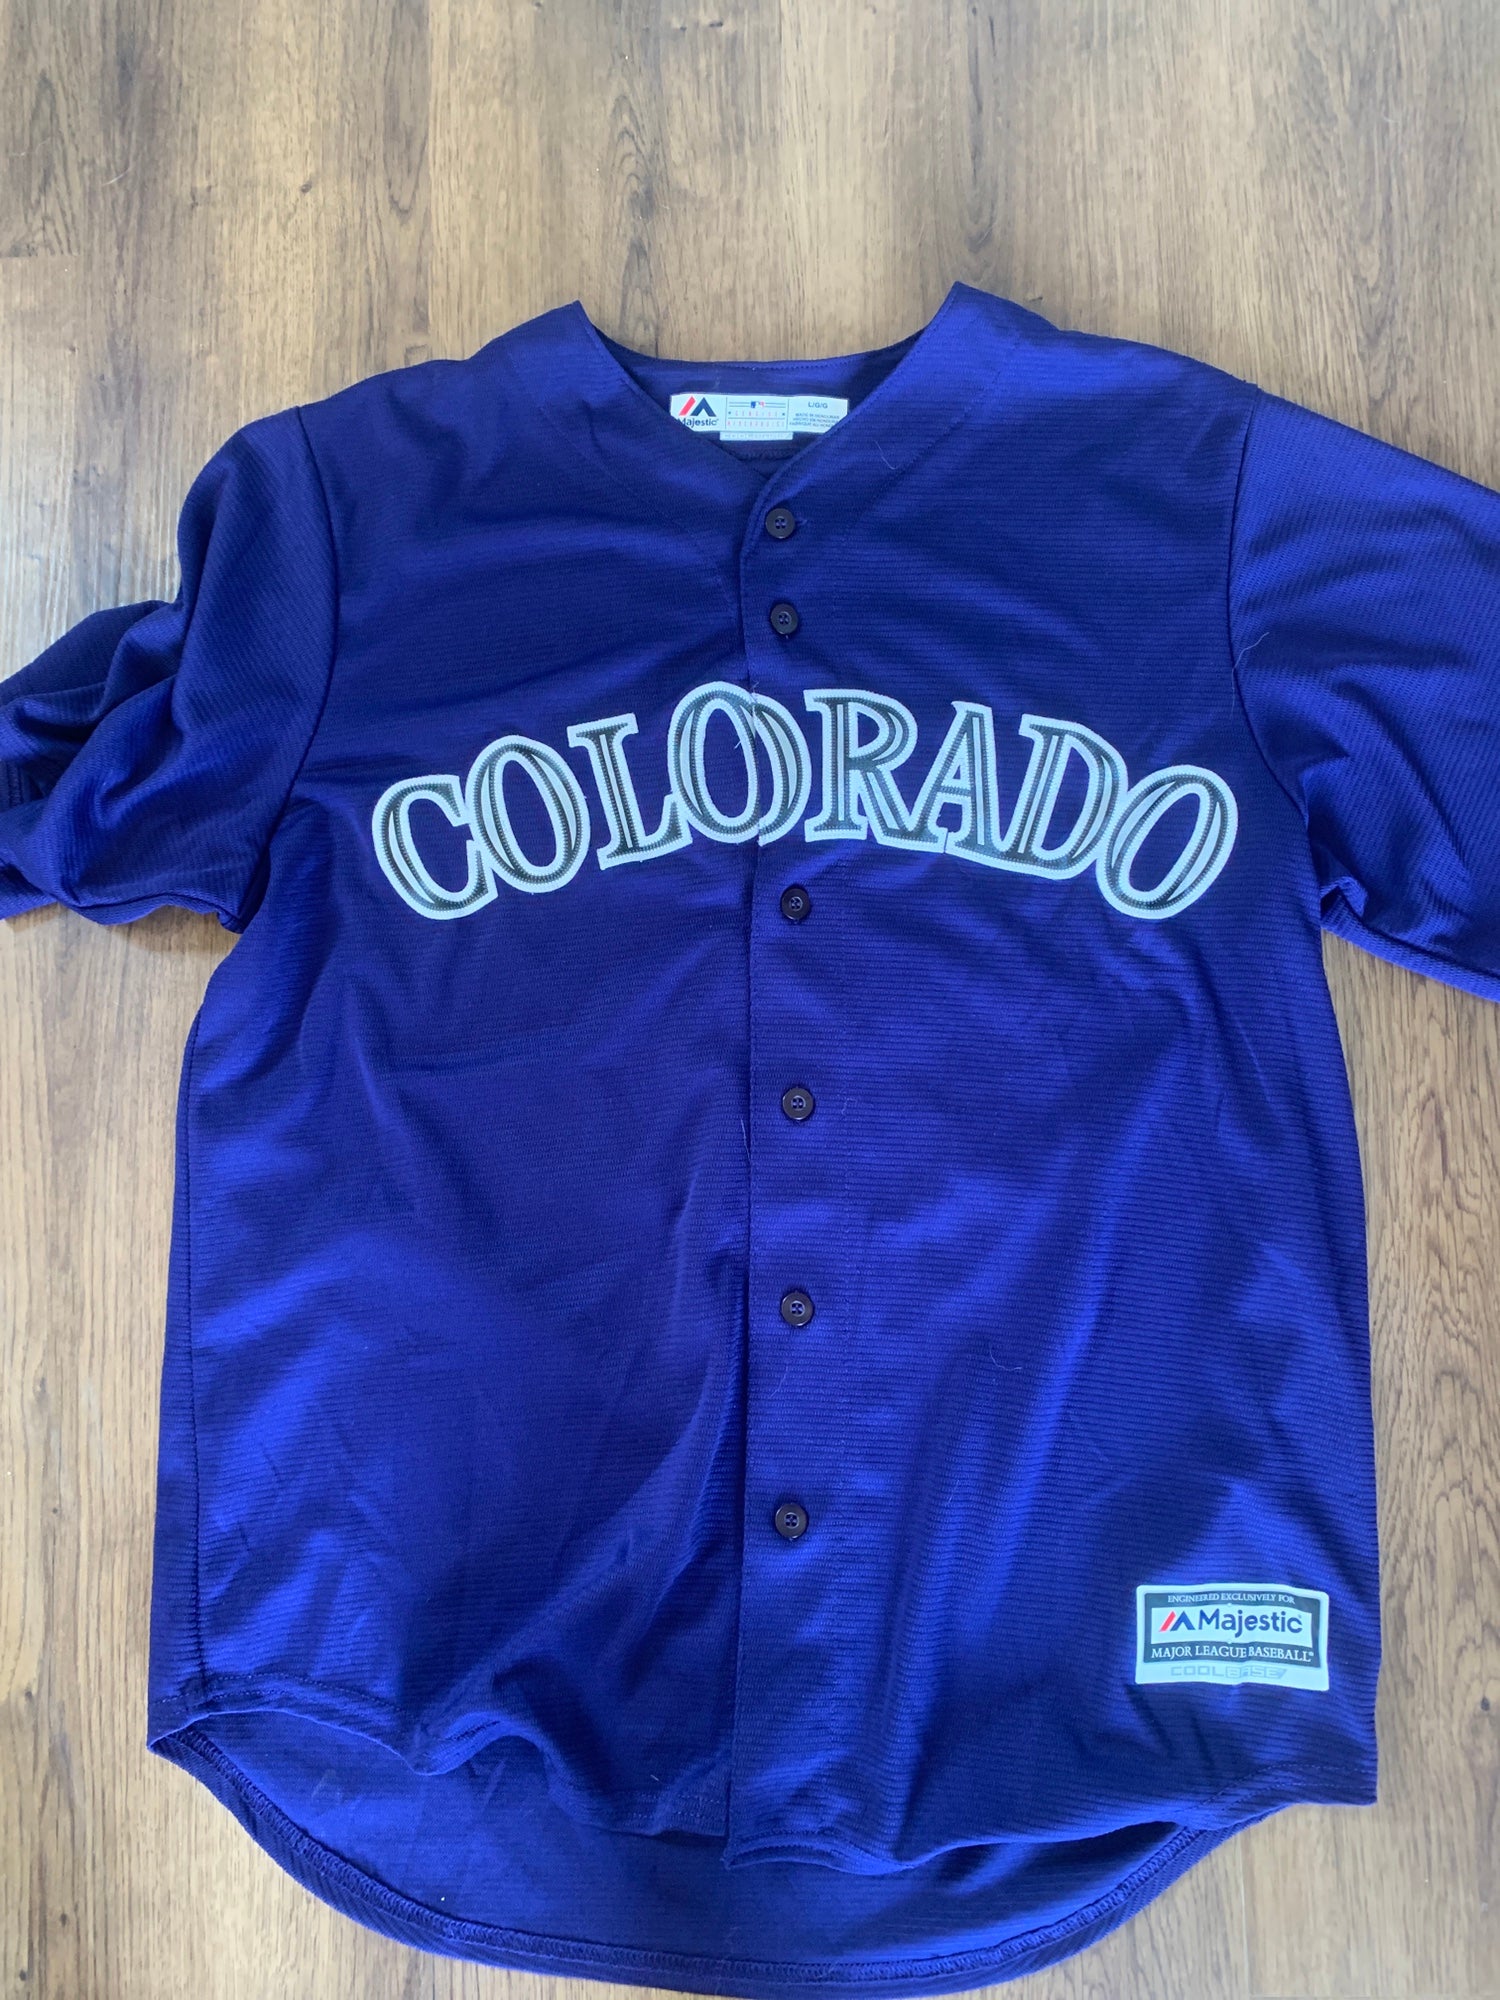 Trevor Story Colorado Rockies Autographed Topps White Majestic Authentic  Jersey with MLB Debut 4-4-16 Inscription